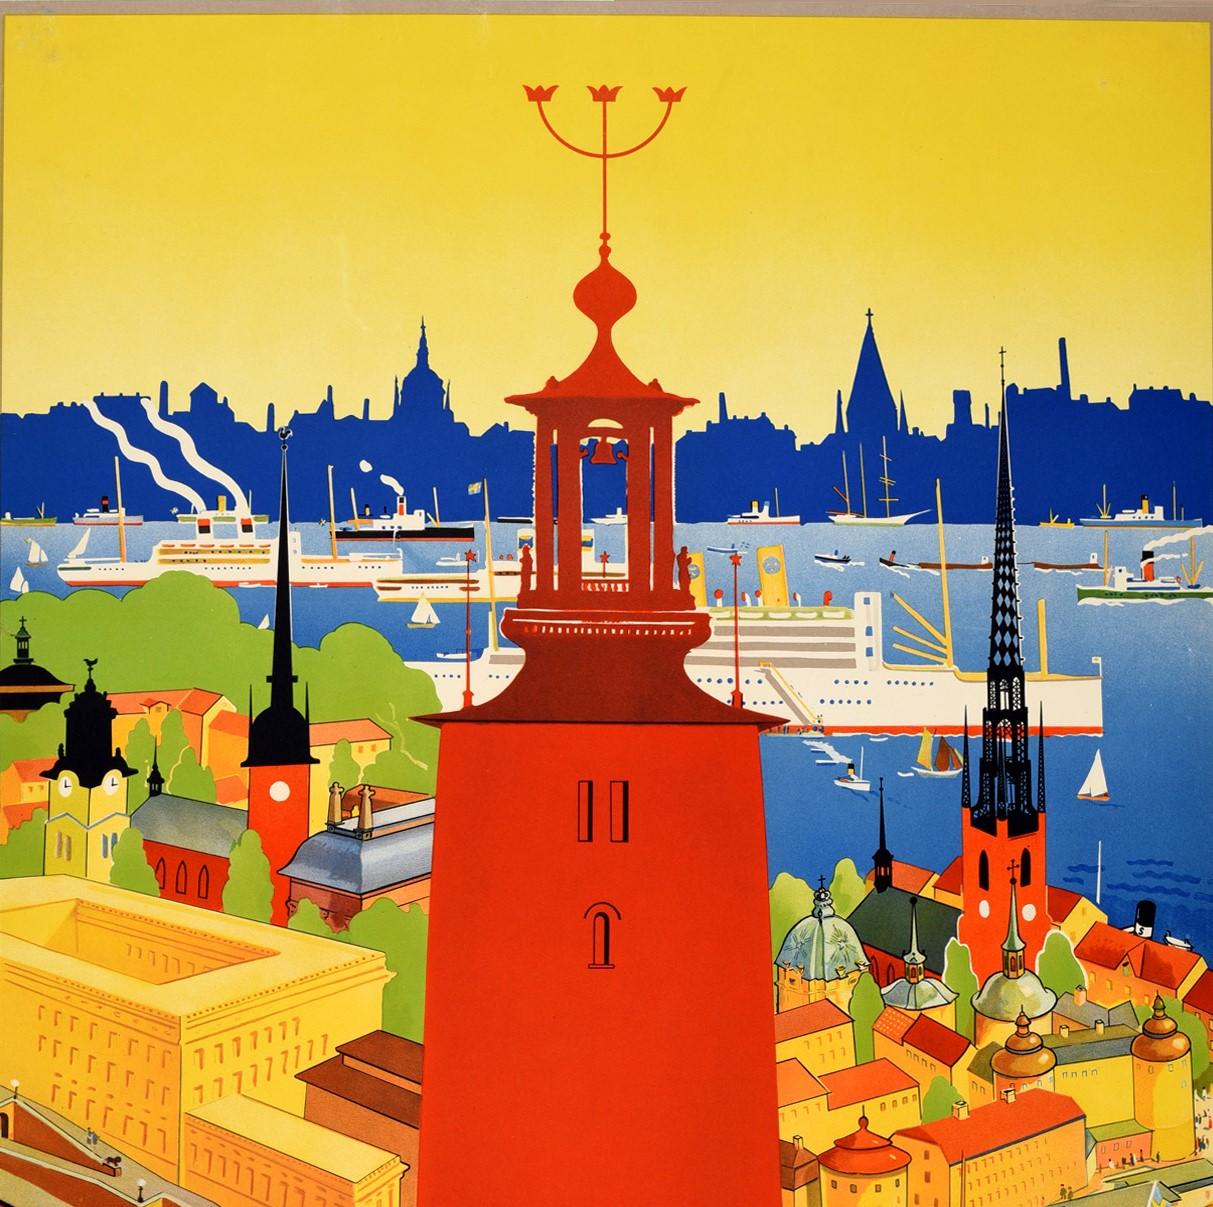 Original vintage travel poster for Stockholm featuring a great illustration by Iwar Donner (1884-1964) depicting the red tower of Stockholm City Hall prominently in the centre with the colorful trees and historic city buildings in the background